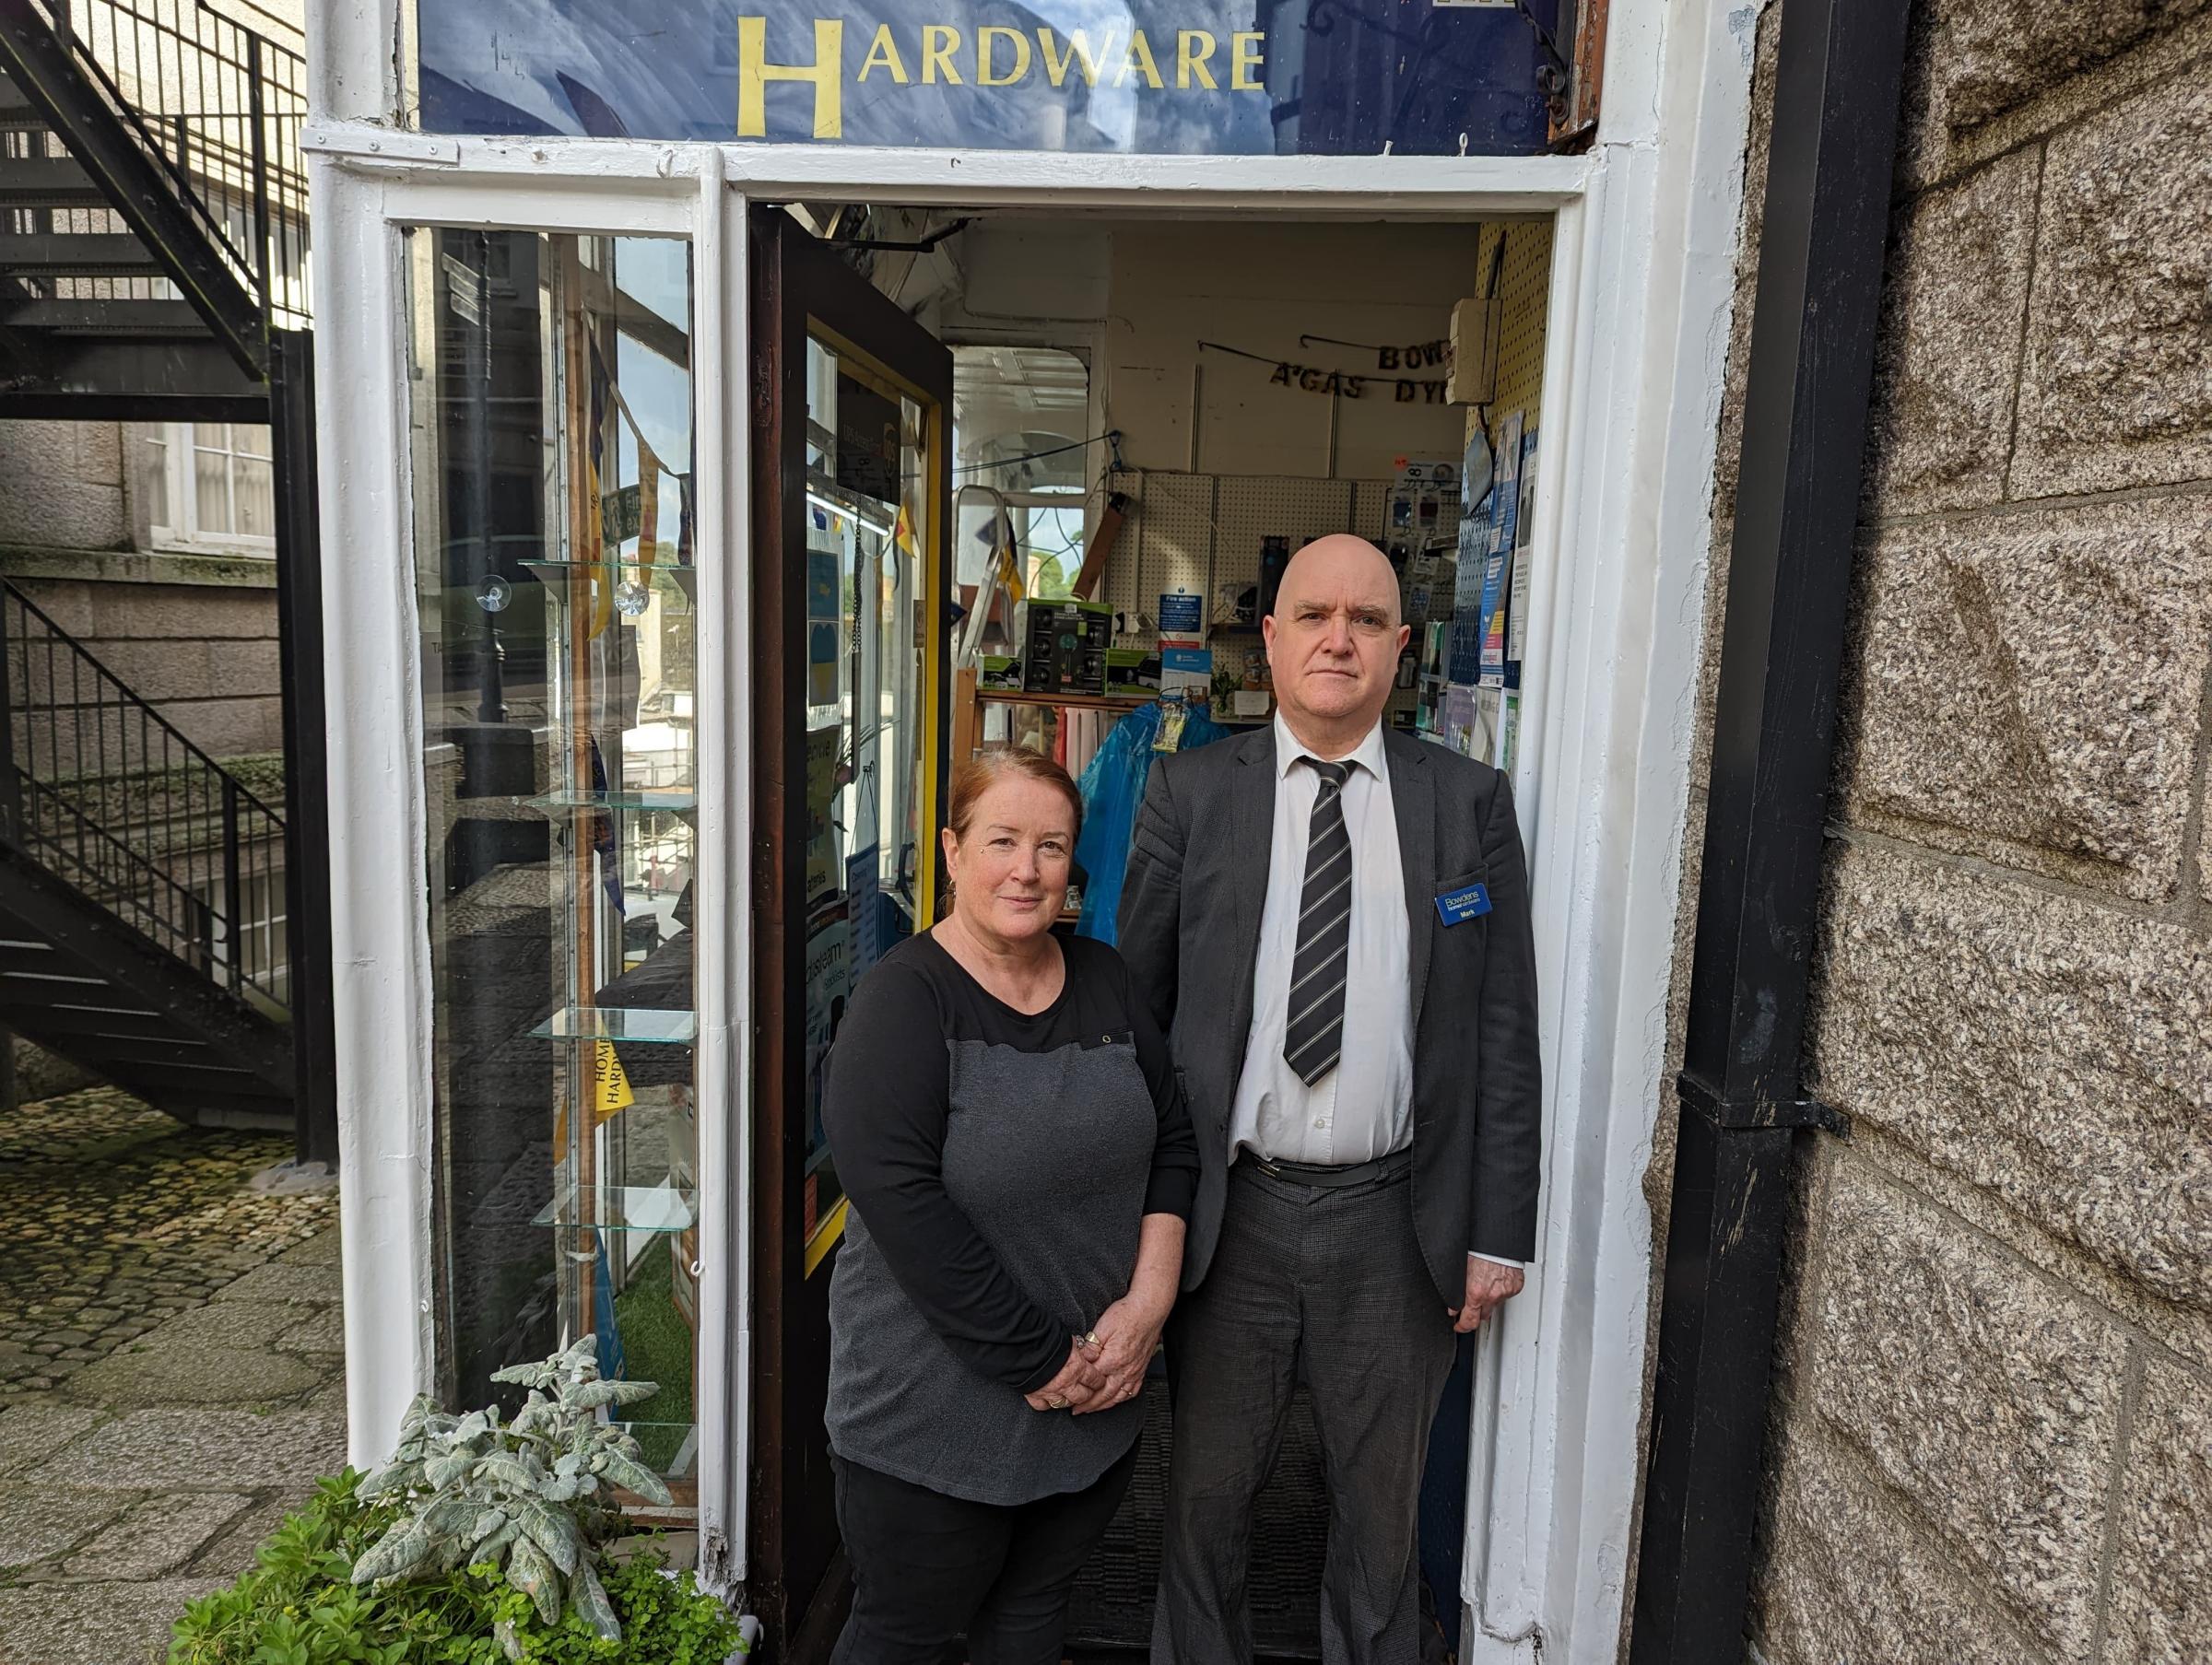 Mark Slater and Jean Slater owners of Bowdens Hardware Shop have paid their respects to The Queen